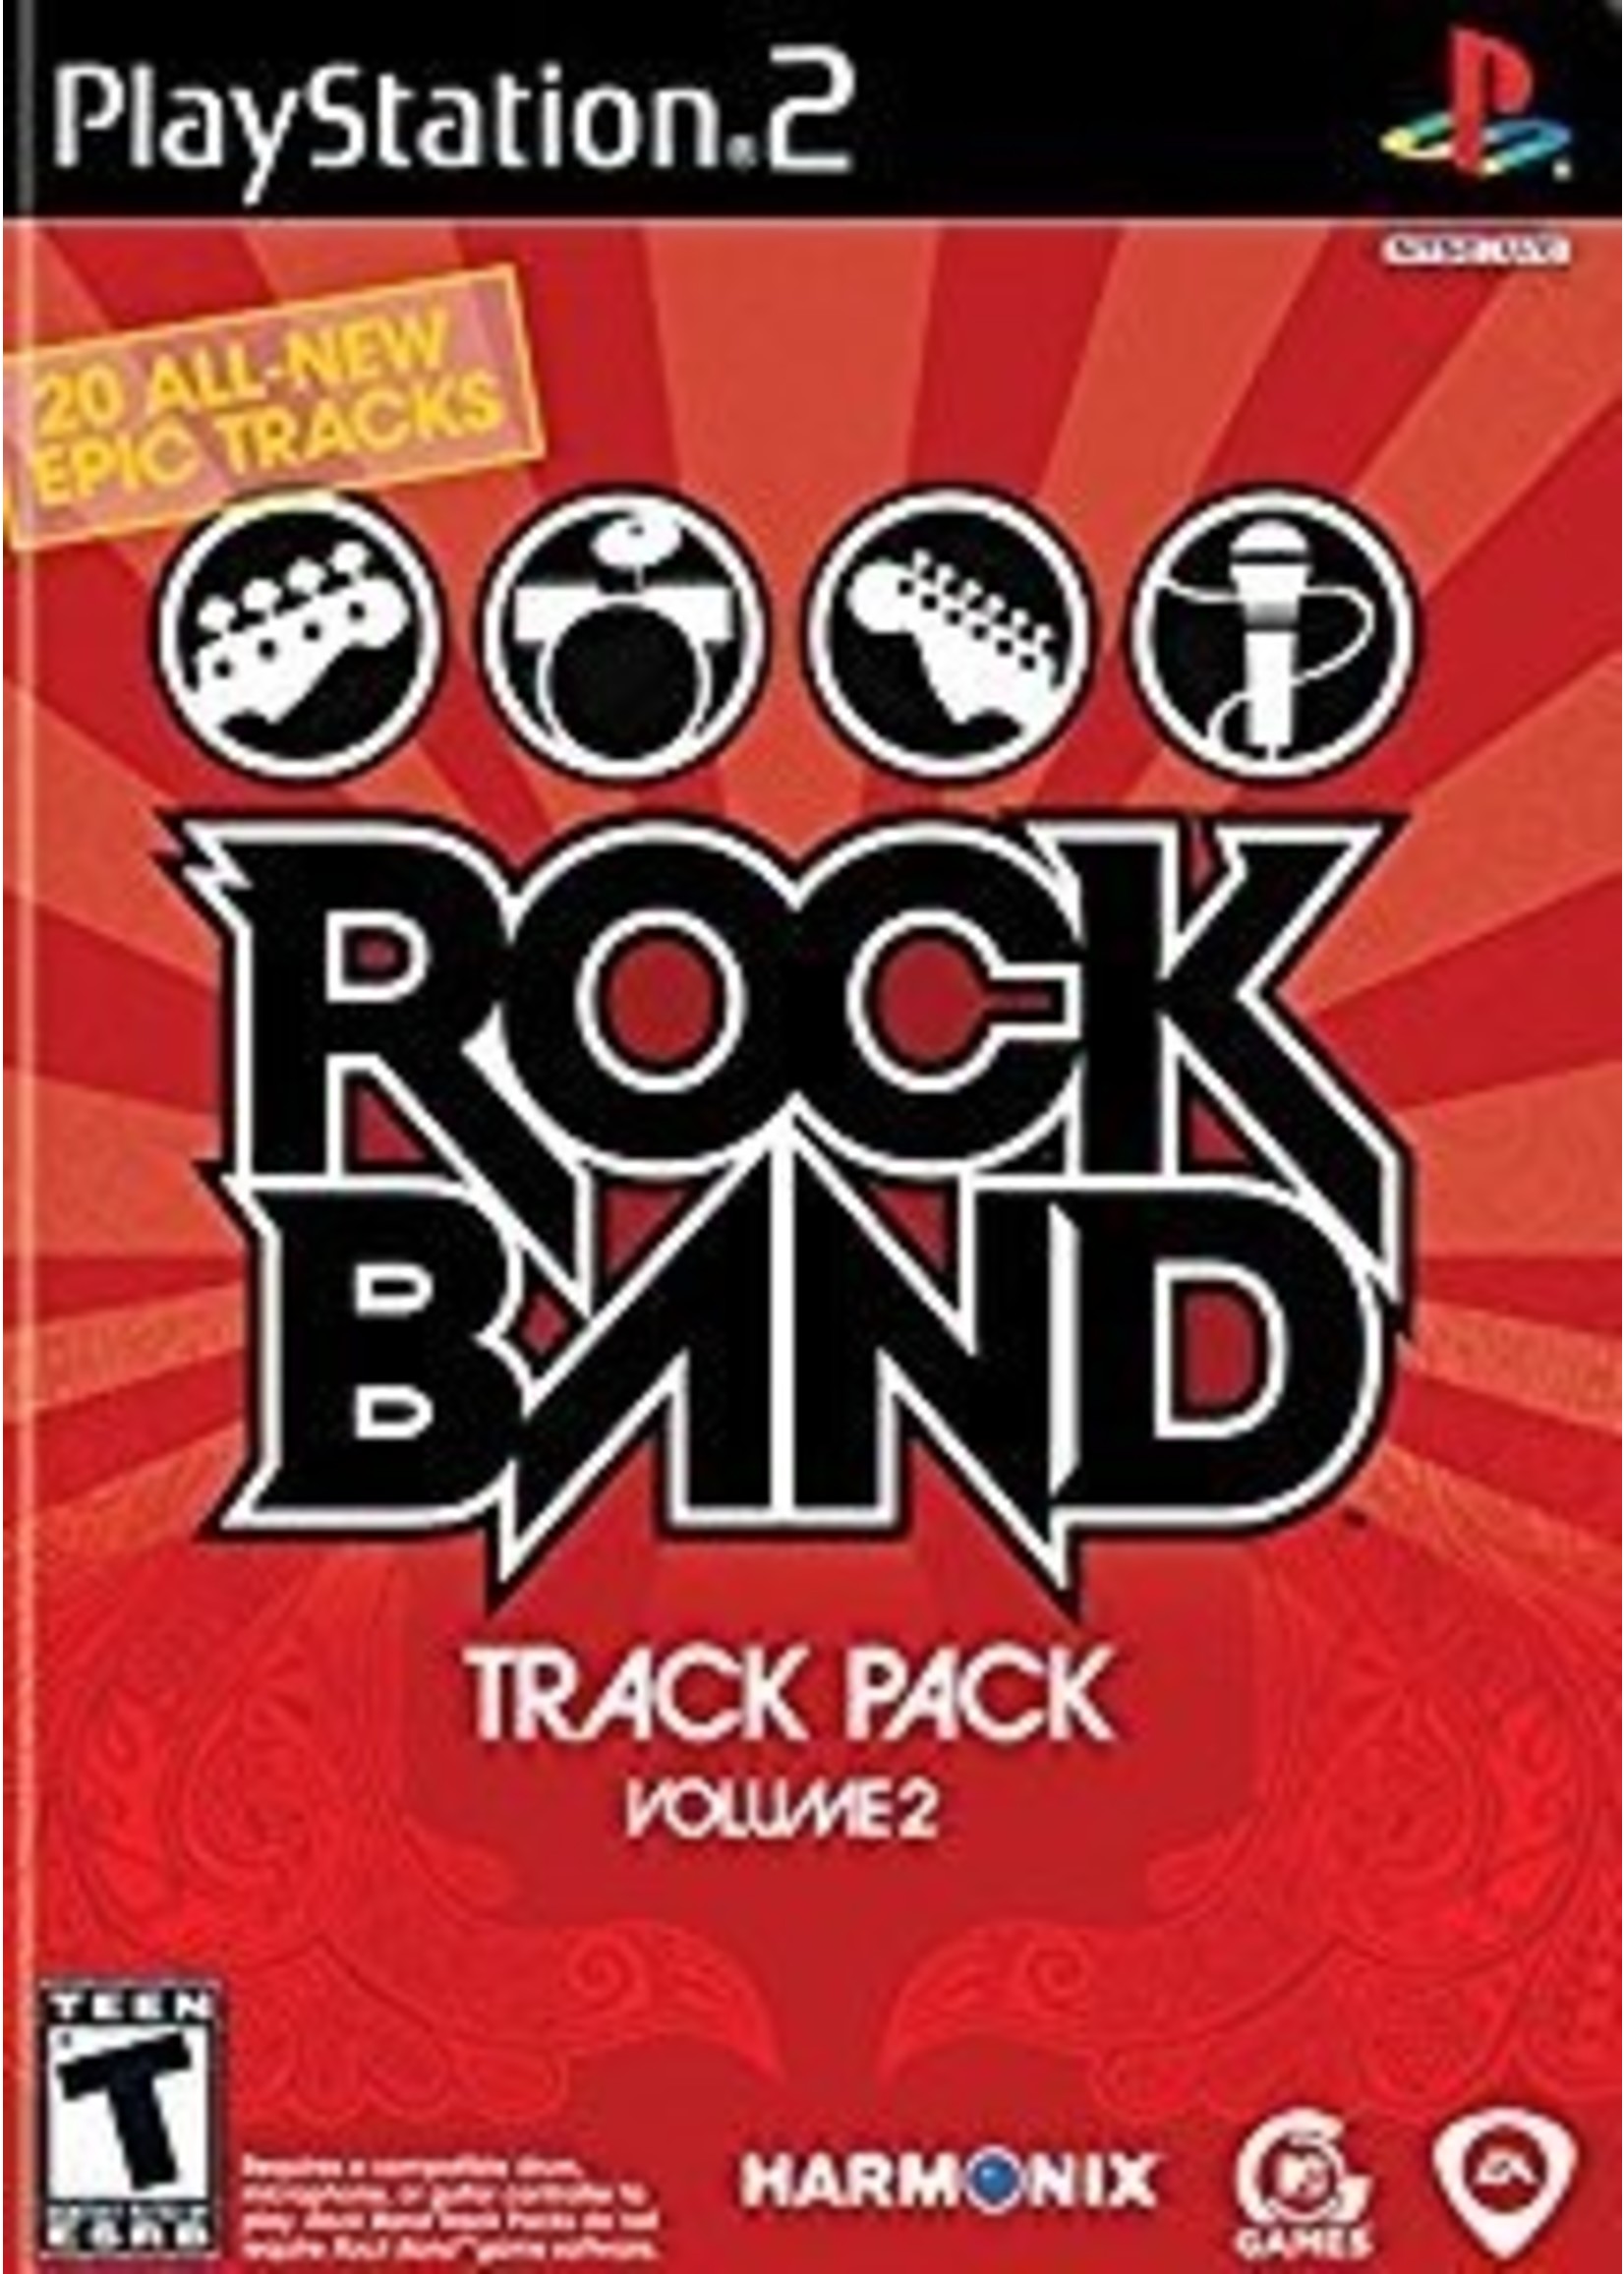 Sony Playstation 2 (PS2) Rock Band Track Pack Volume 2